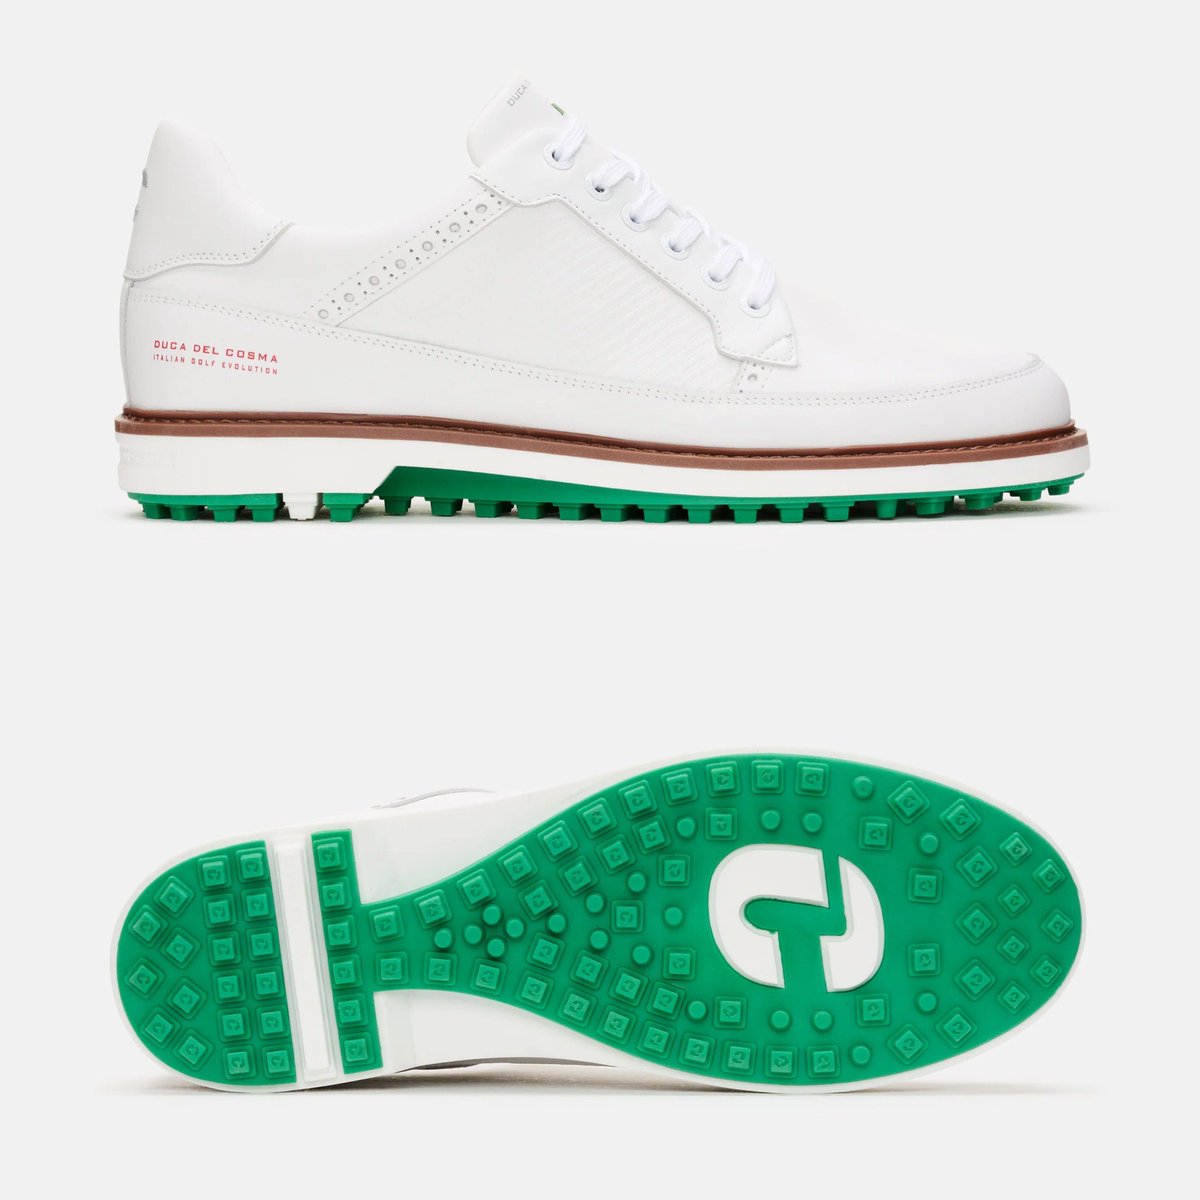 I want to have a Duca del Cosma Masters Inspired golf shoes giveaway. Sammy wants everyone to pick whatever Duca del Cosma style golf shoes they like best. We’re about to lock horns here. #TheMasters